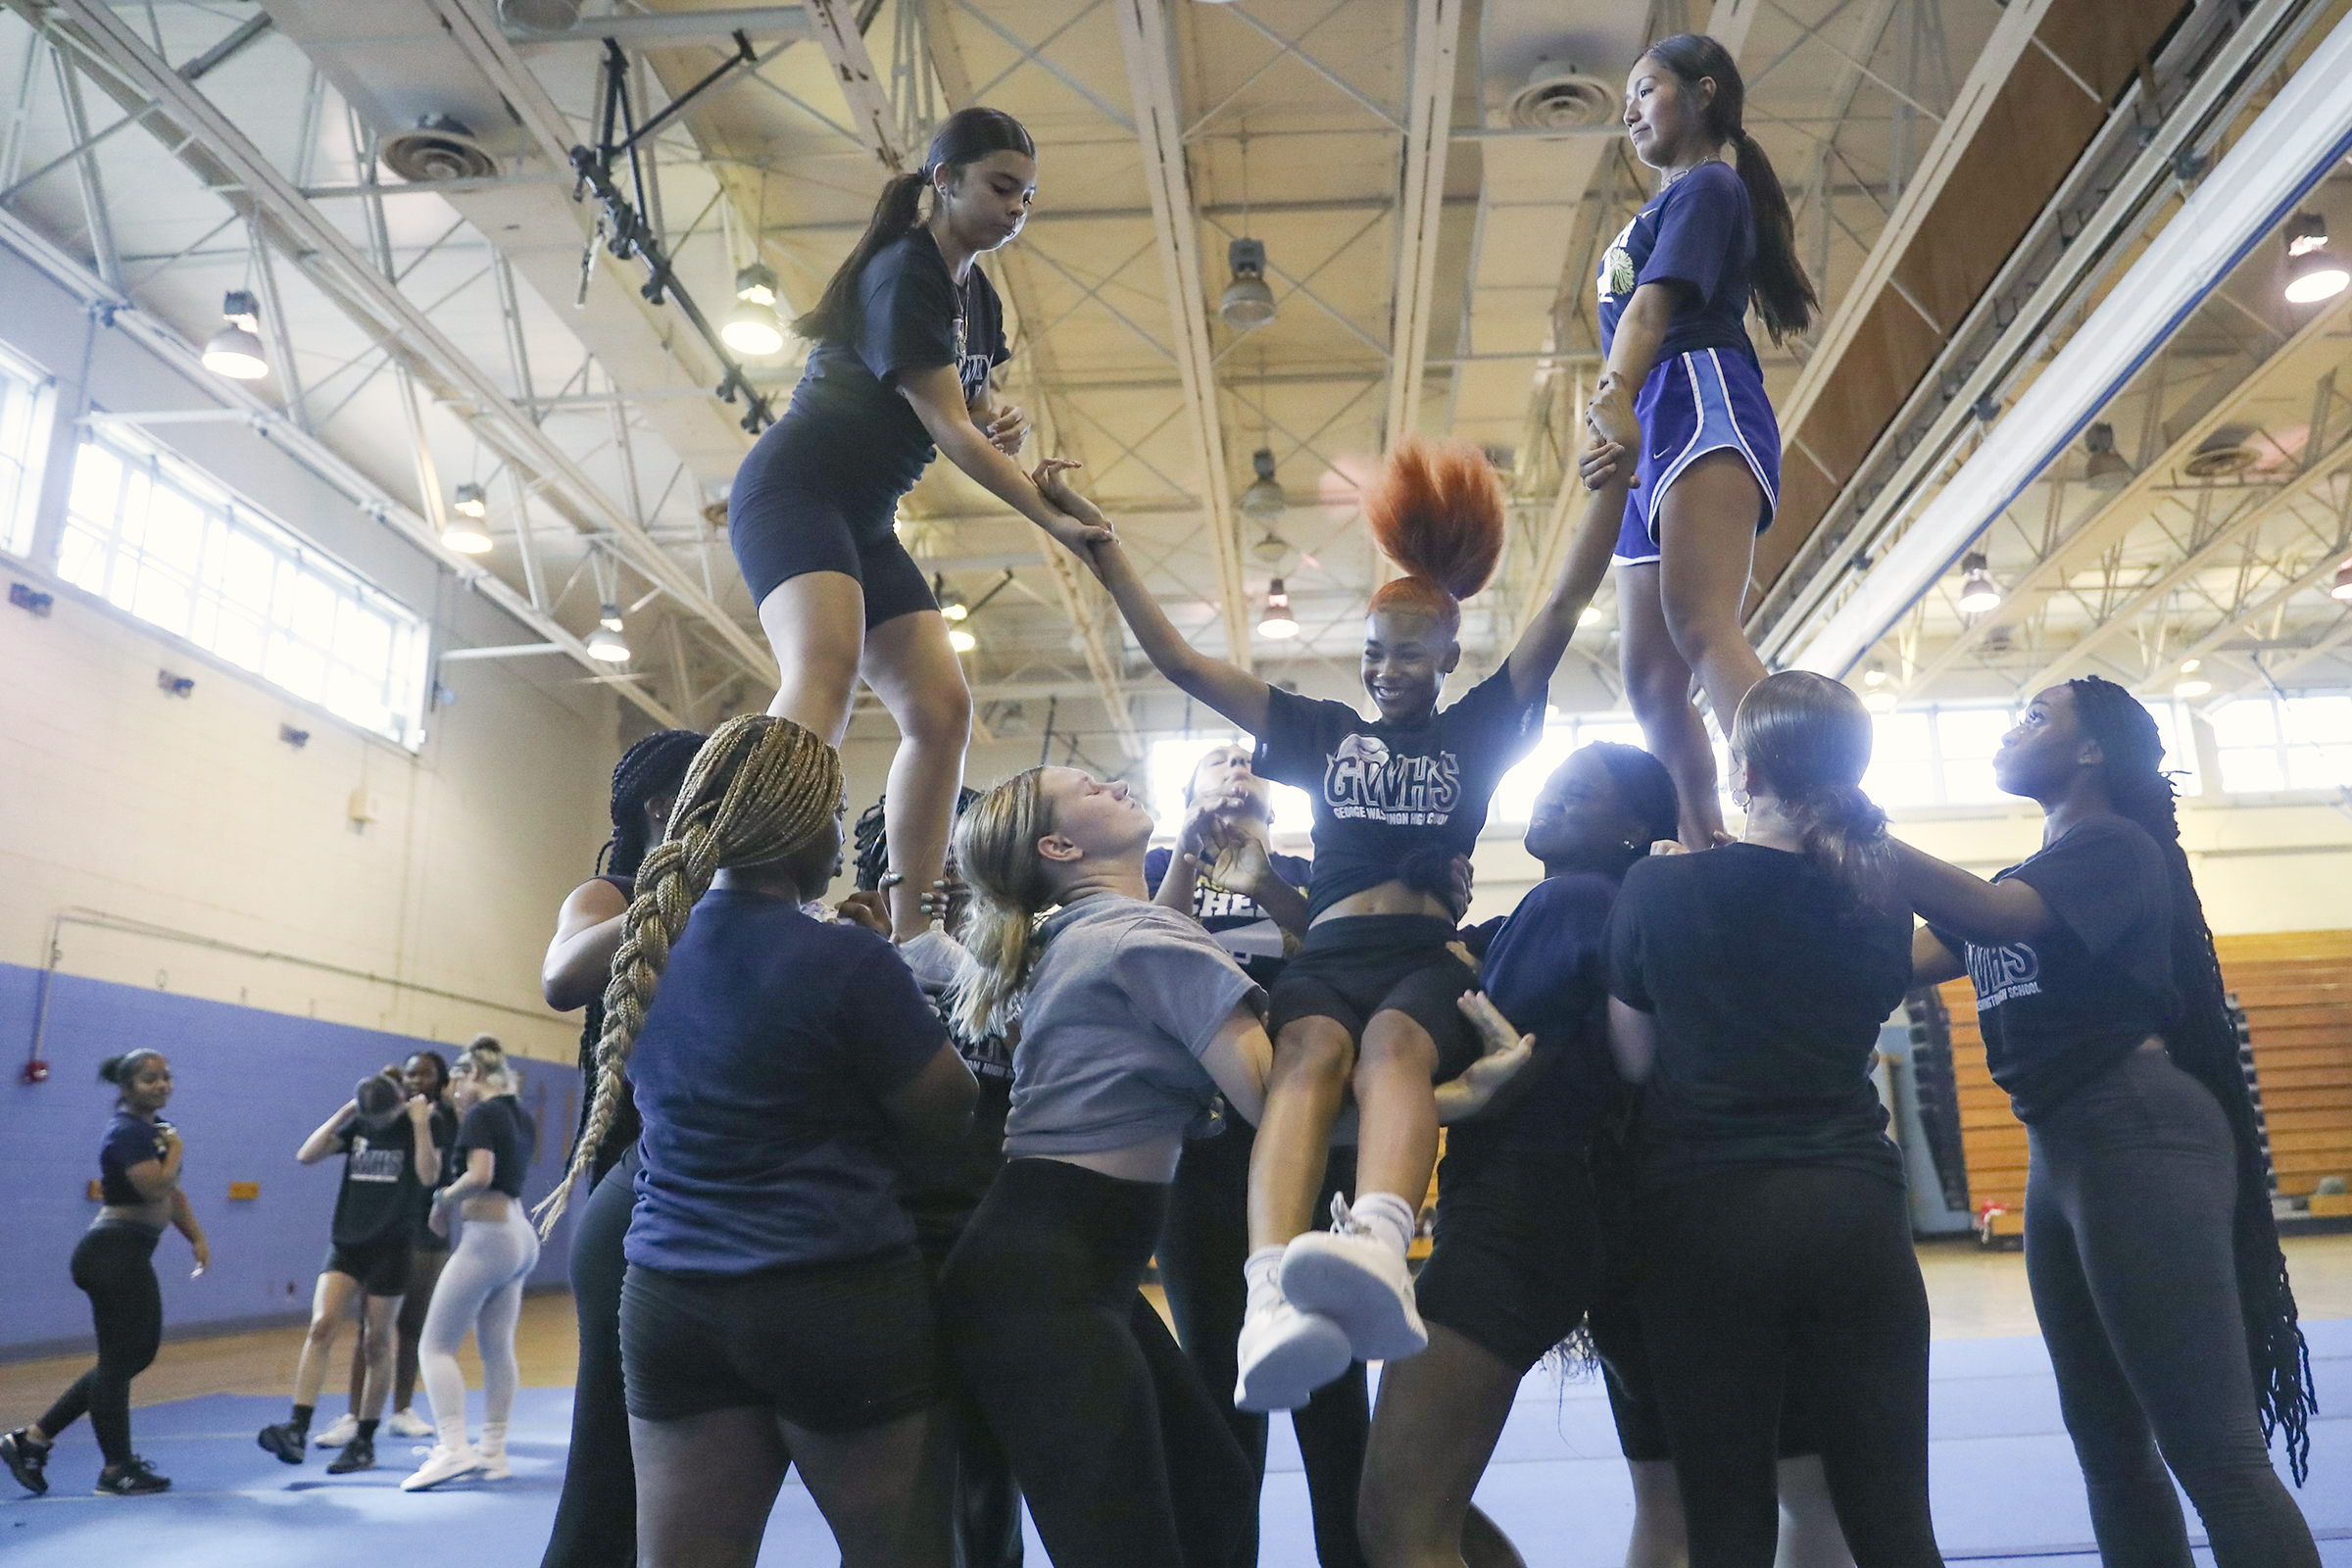 Cheerleader Home Sex Tape - The George Washington cheer team is Philly's first to make it to nationals.  But they need a fundraising miracle